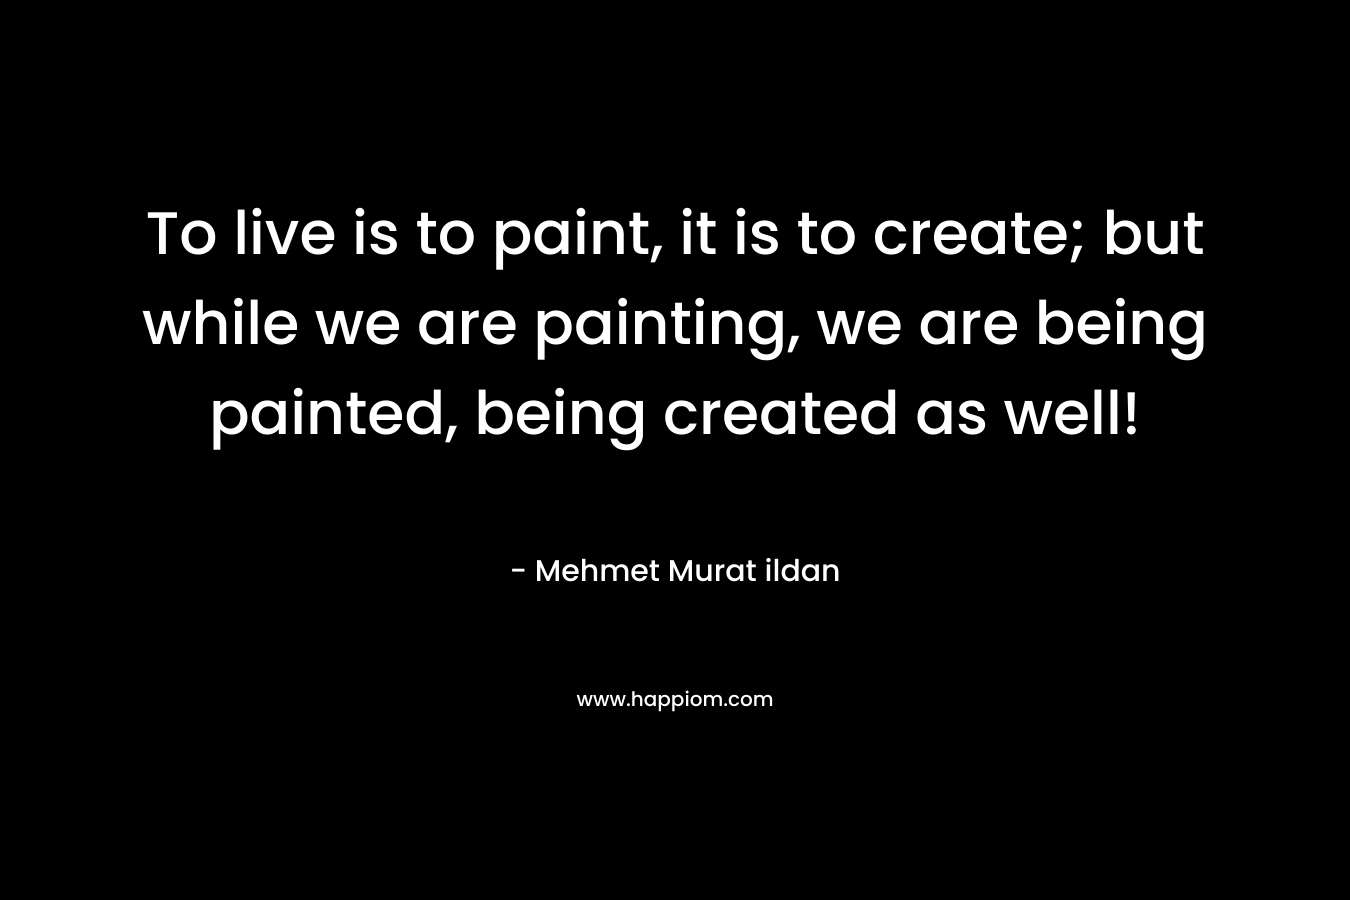 To live is to paint, it is to create; but while we are painting, we are being painted, being created as well! – Mehmet Murat ildan